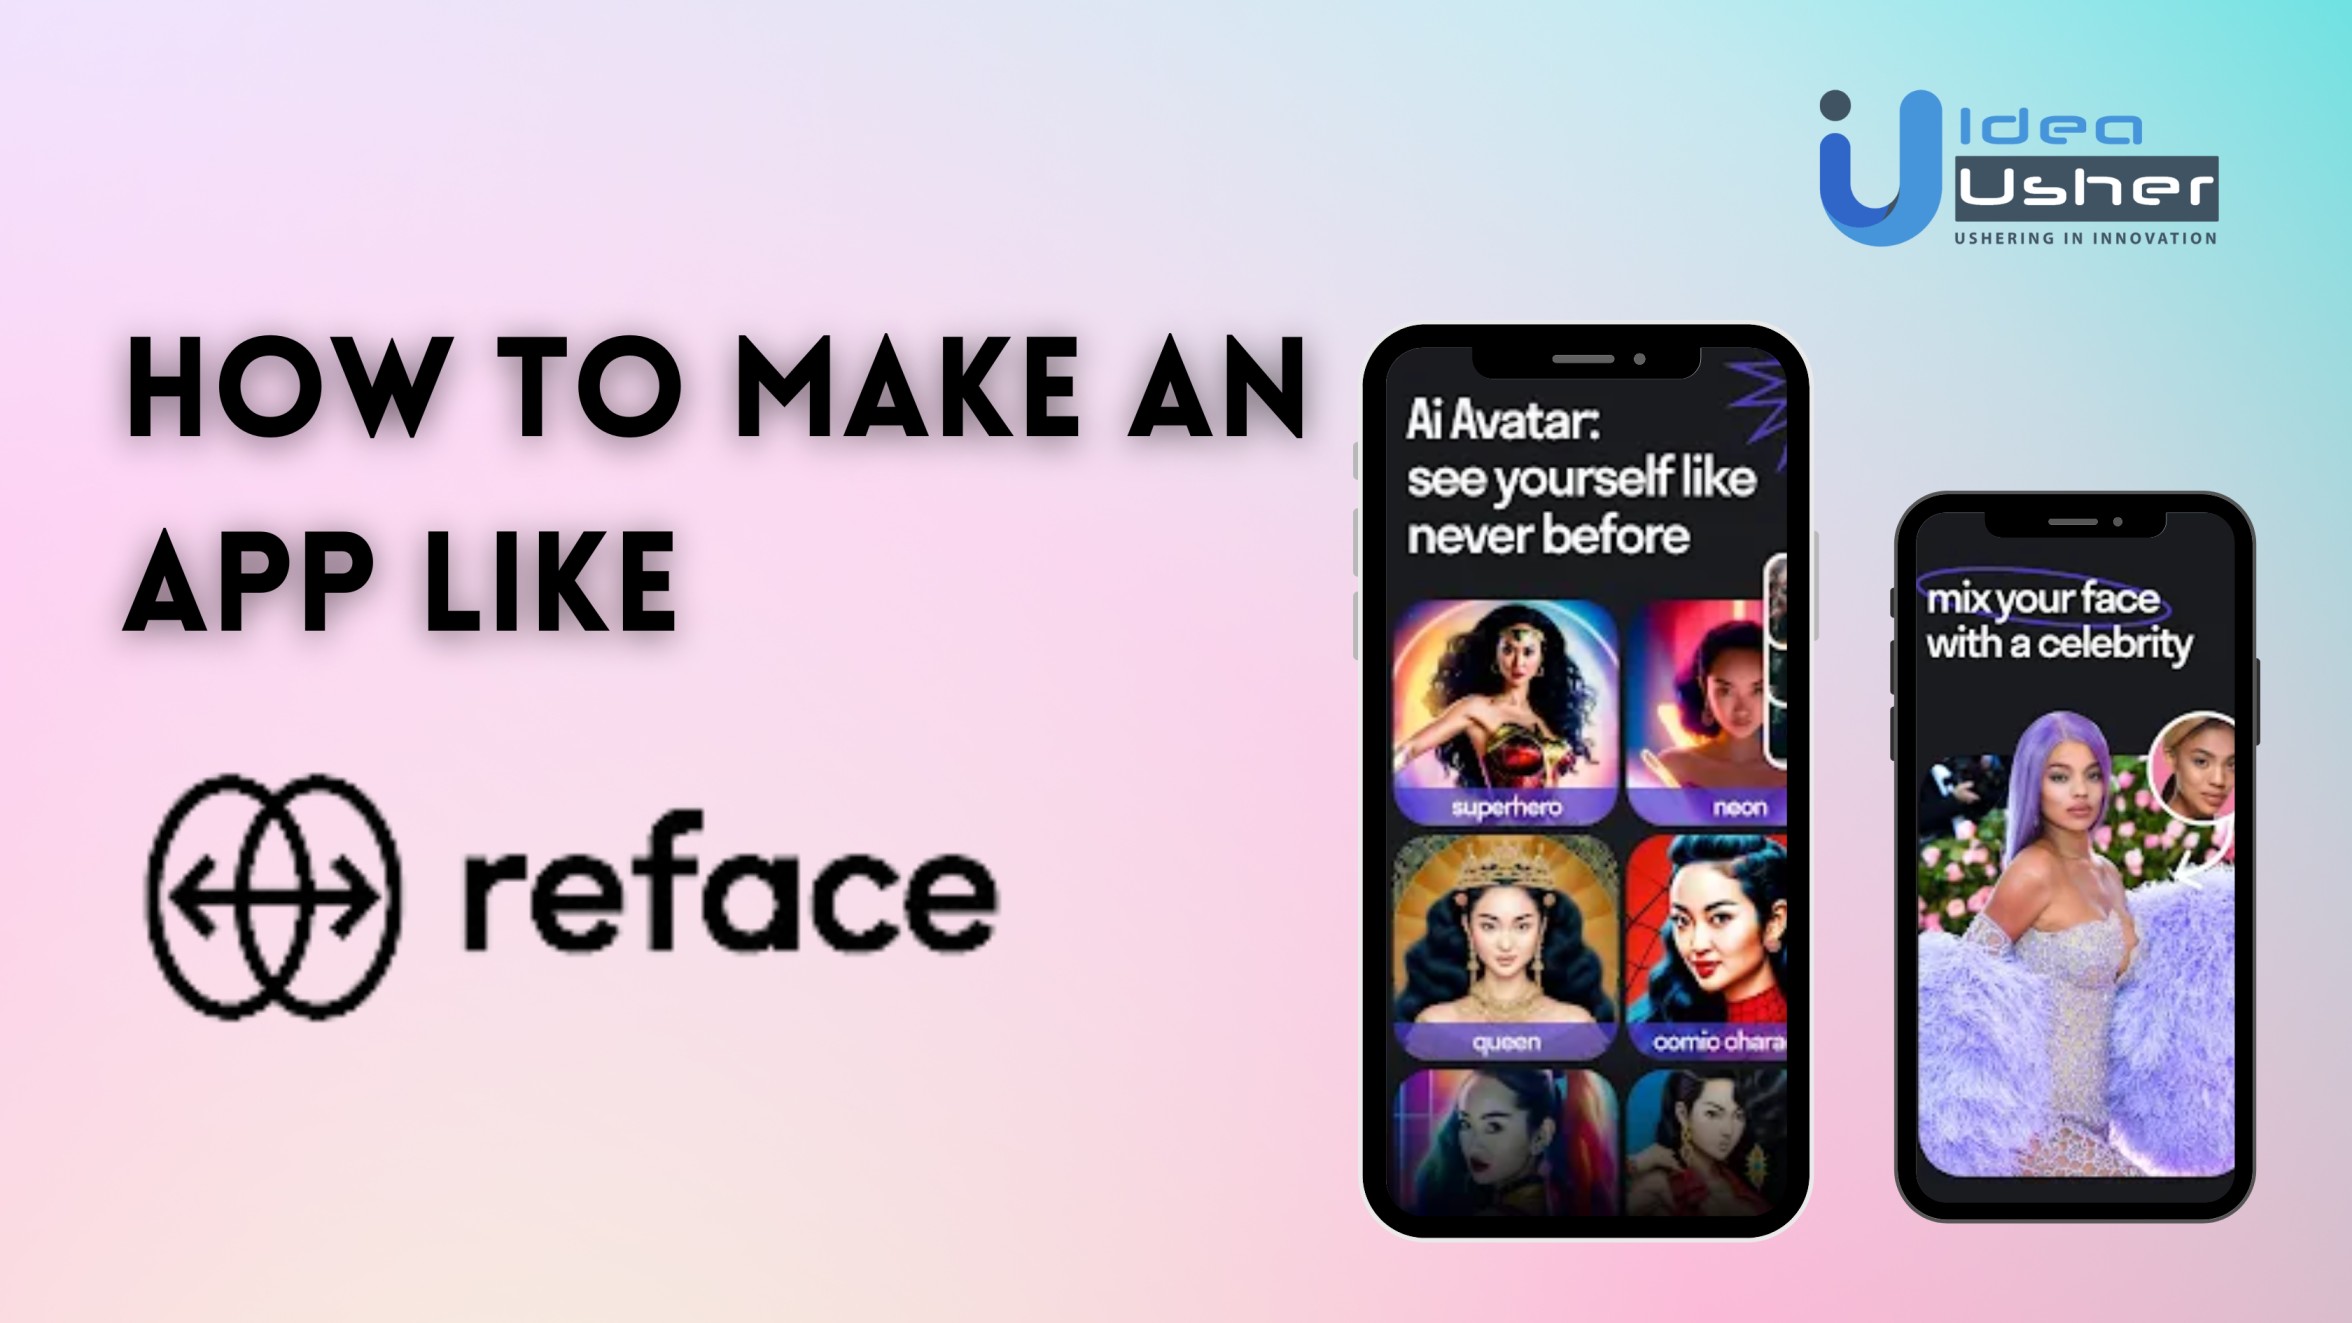 This Deepfake App Can Swap Your Face Into Funny GIFs